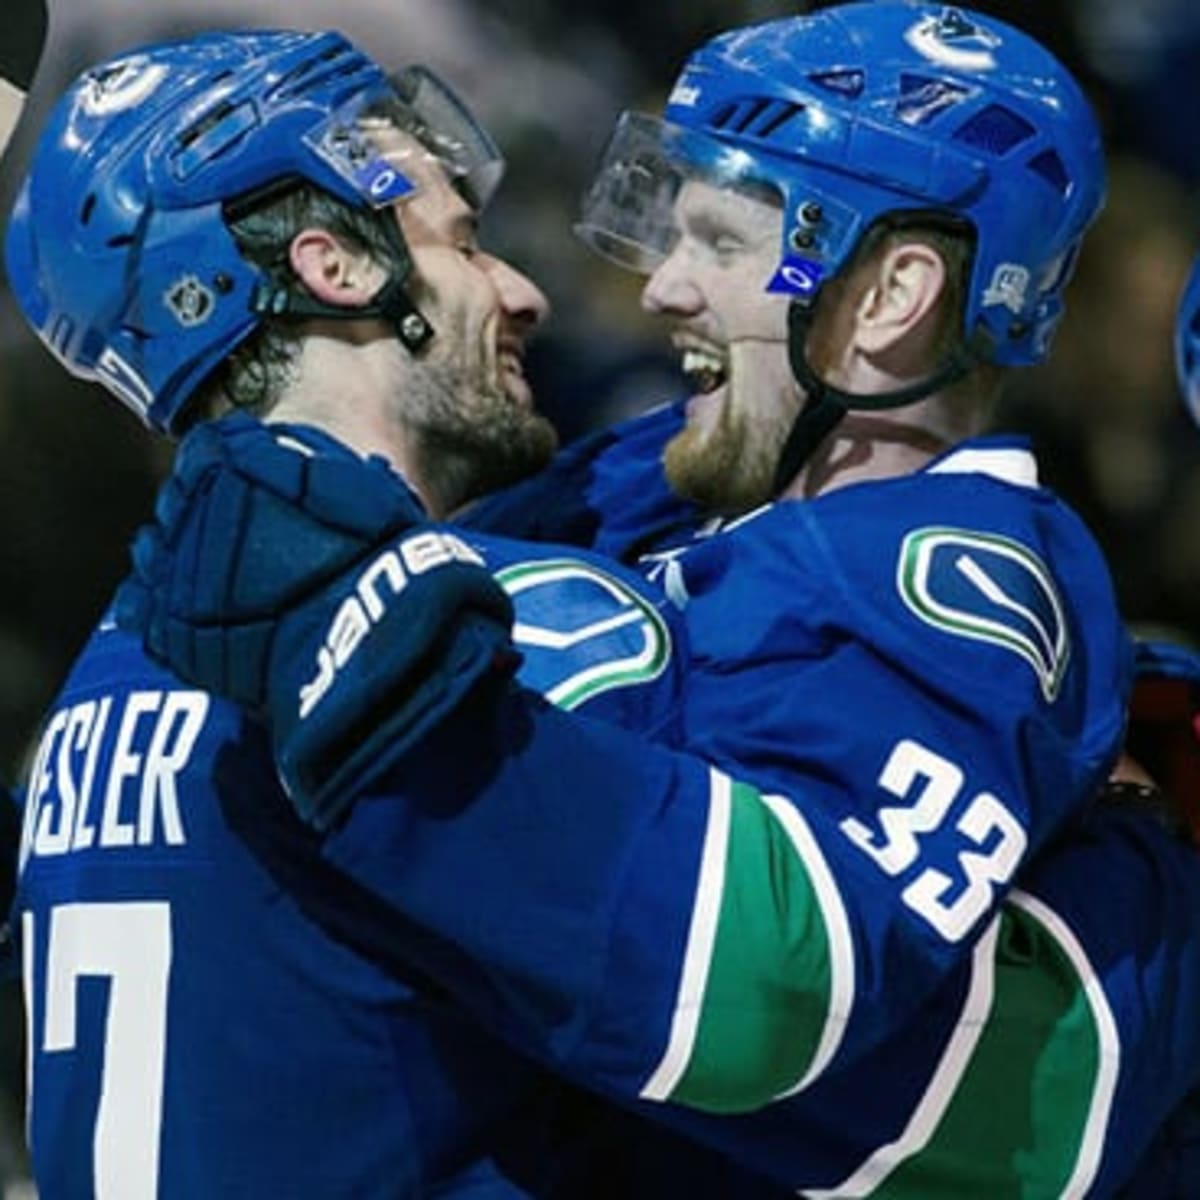 Comparing the 2011 Canucks to the 1989 Stanley Cup champion Flames